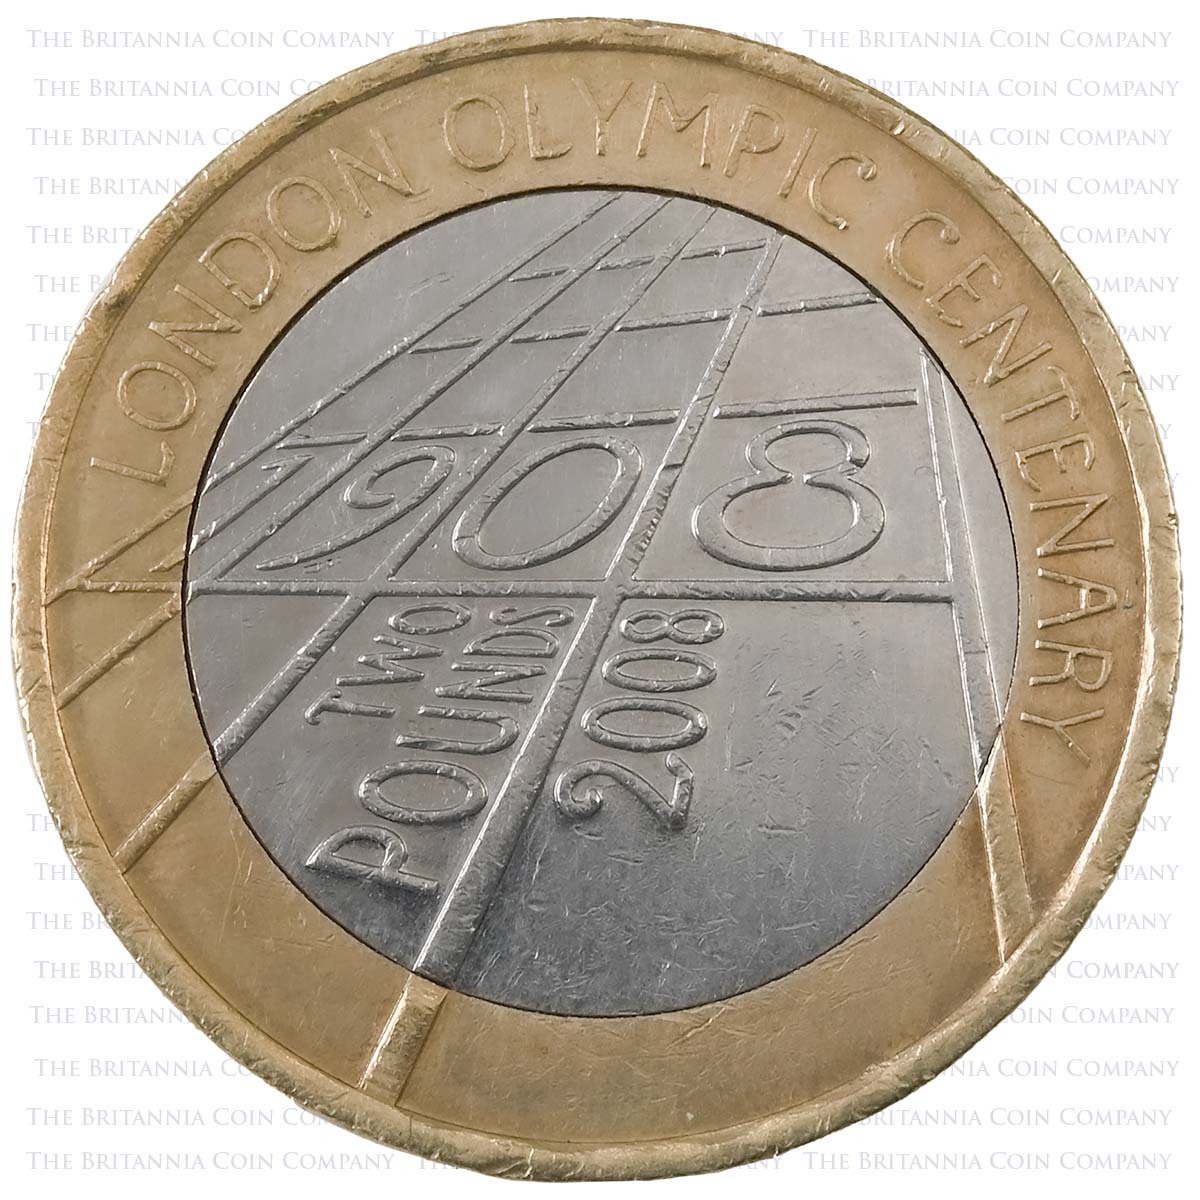 2008 Centenary Of The 1908 London Olympics Circulated Two Pound Coin Reverse